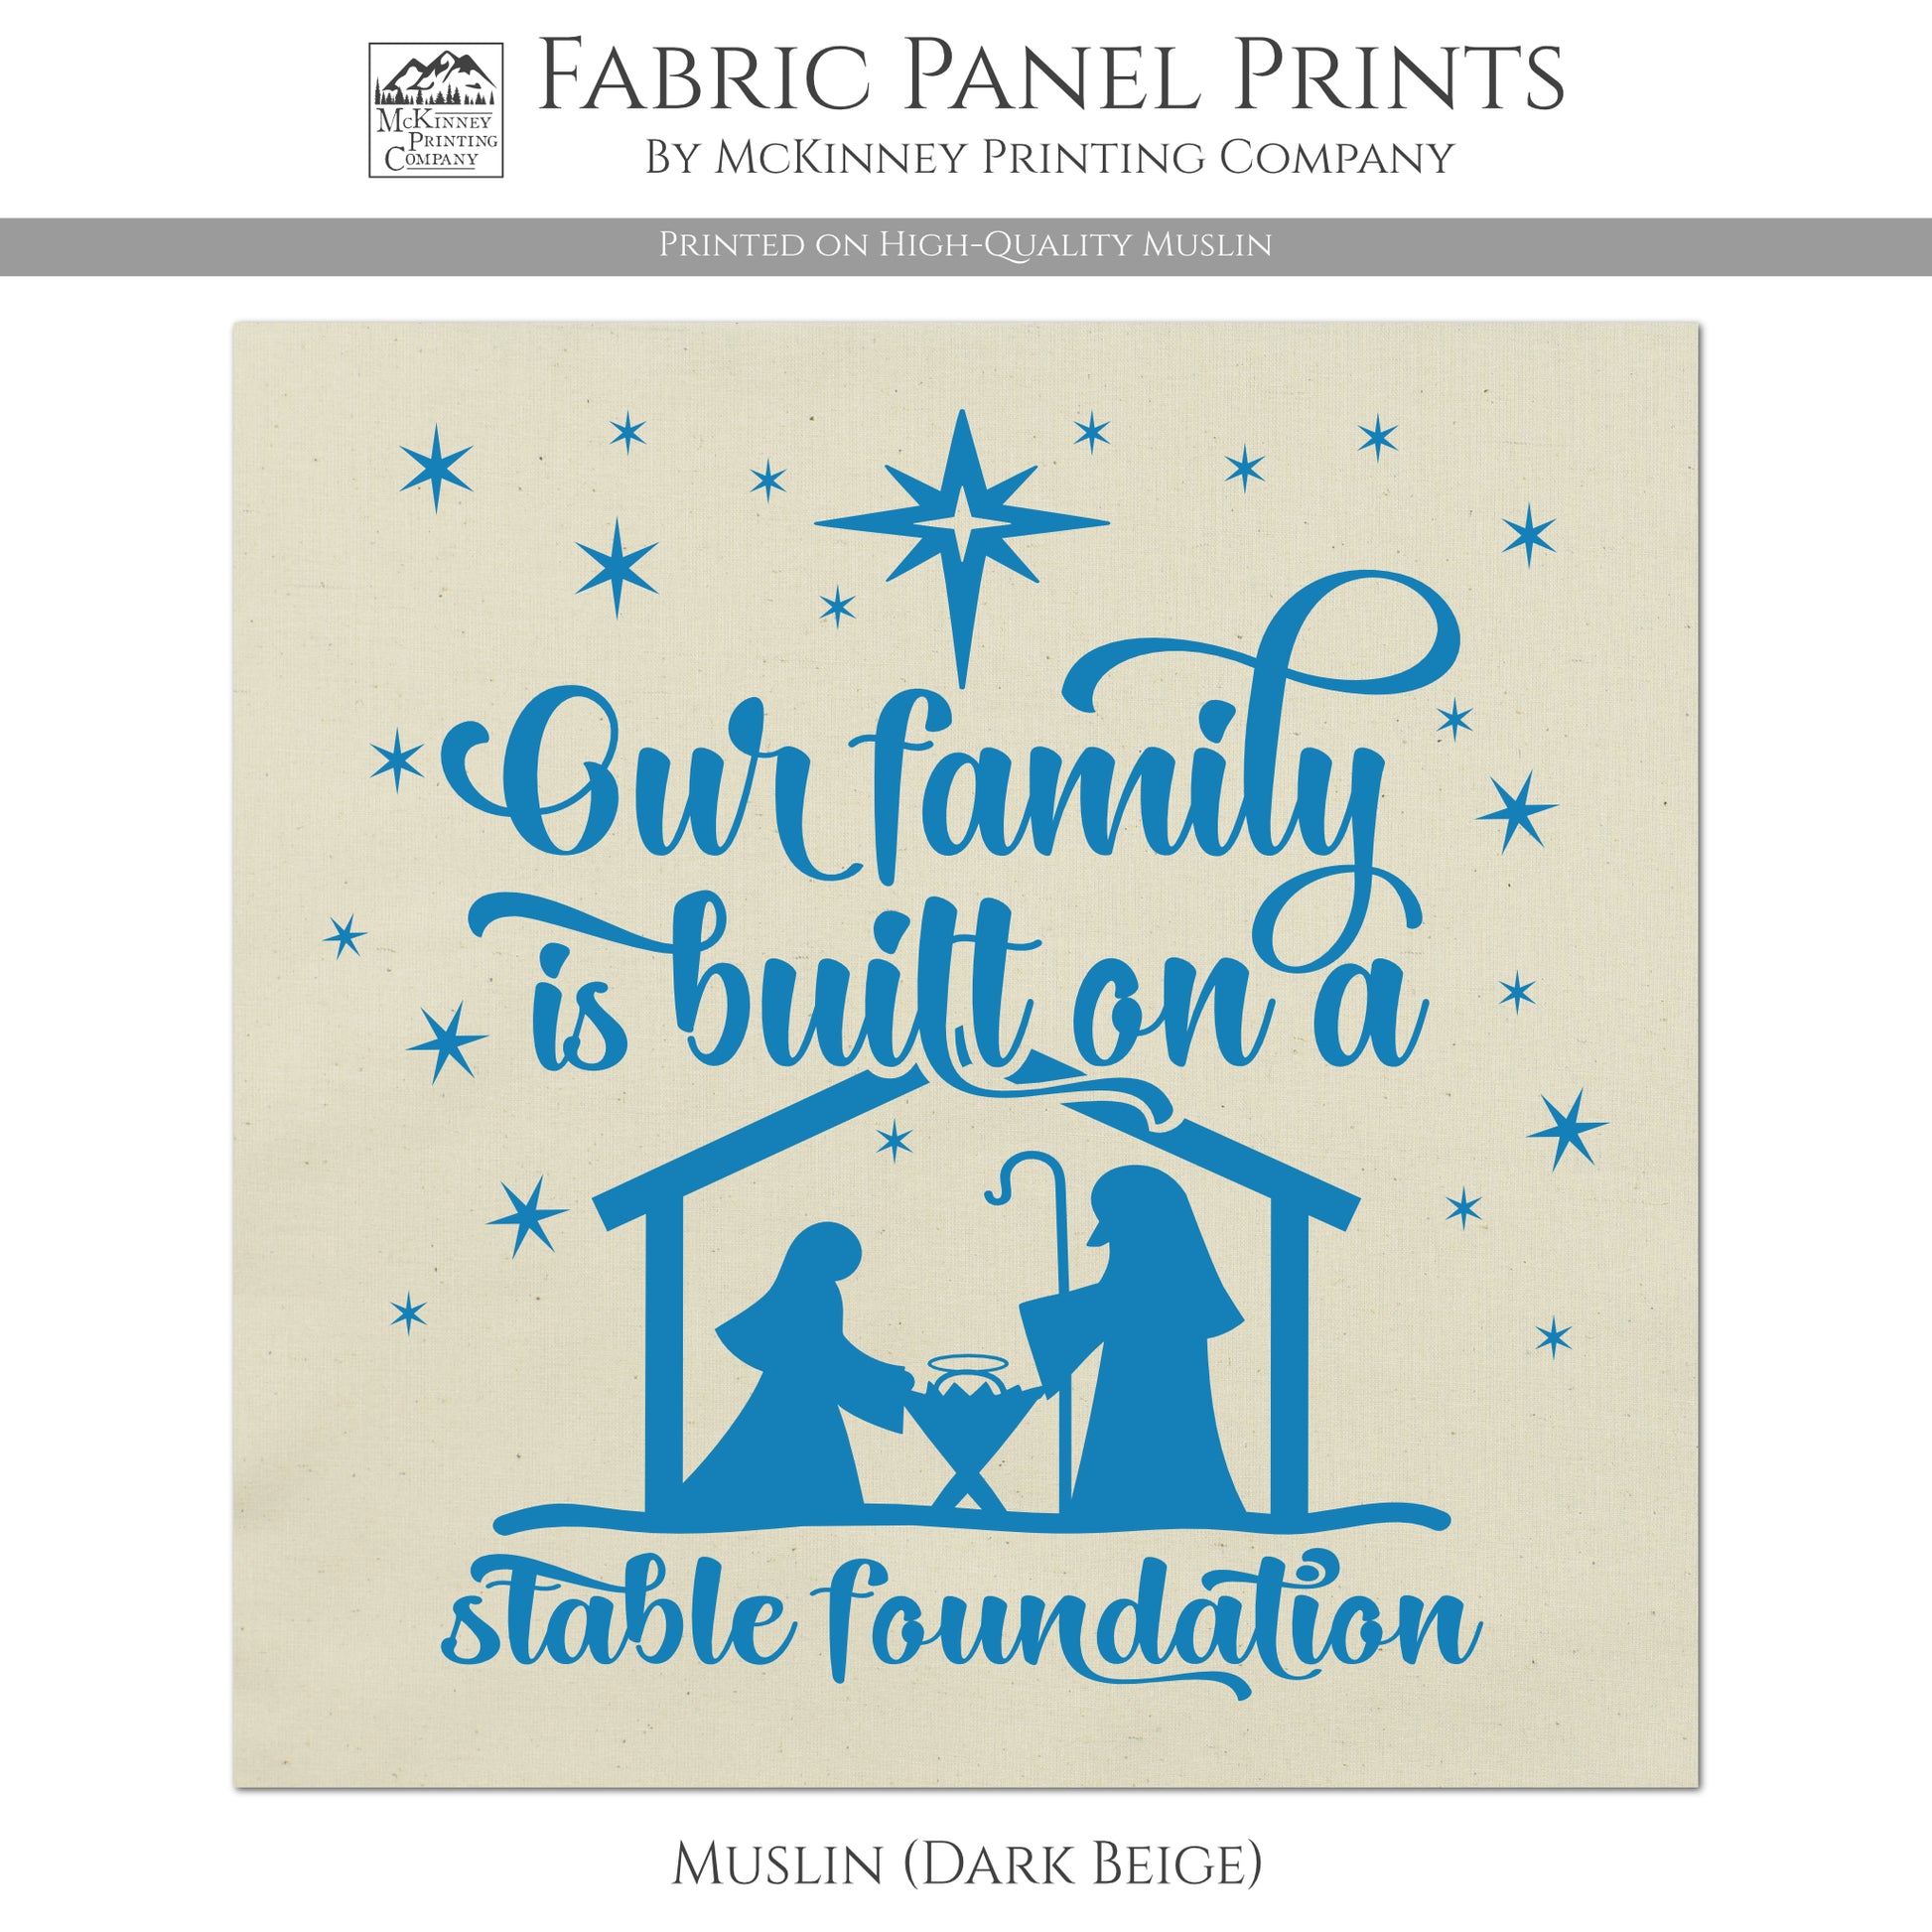 Nativity Scene, Our Family is built on a stable foundation - Christmas Fabric Panels, Quilt Block - Muslin